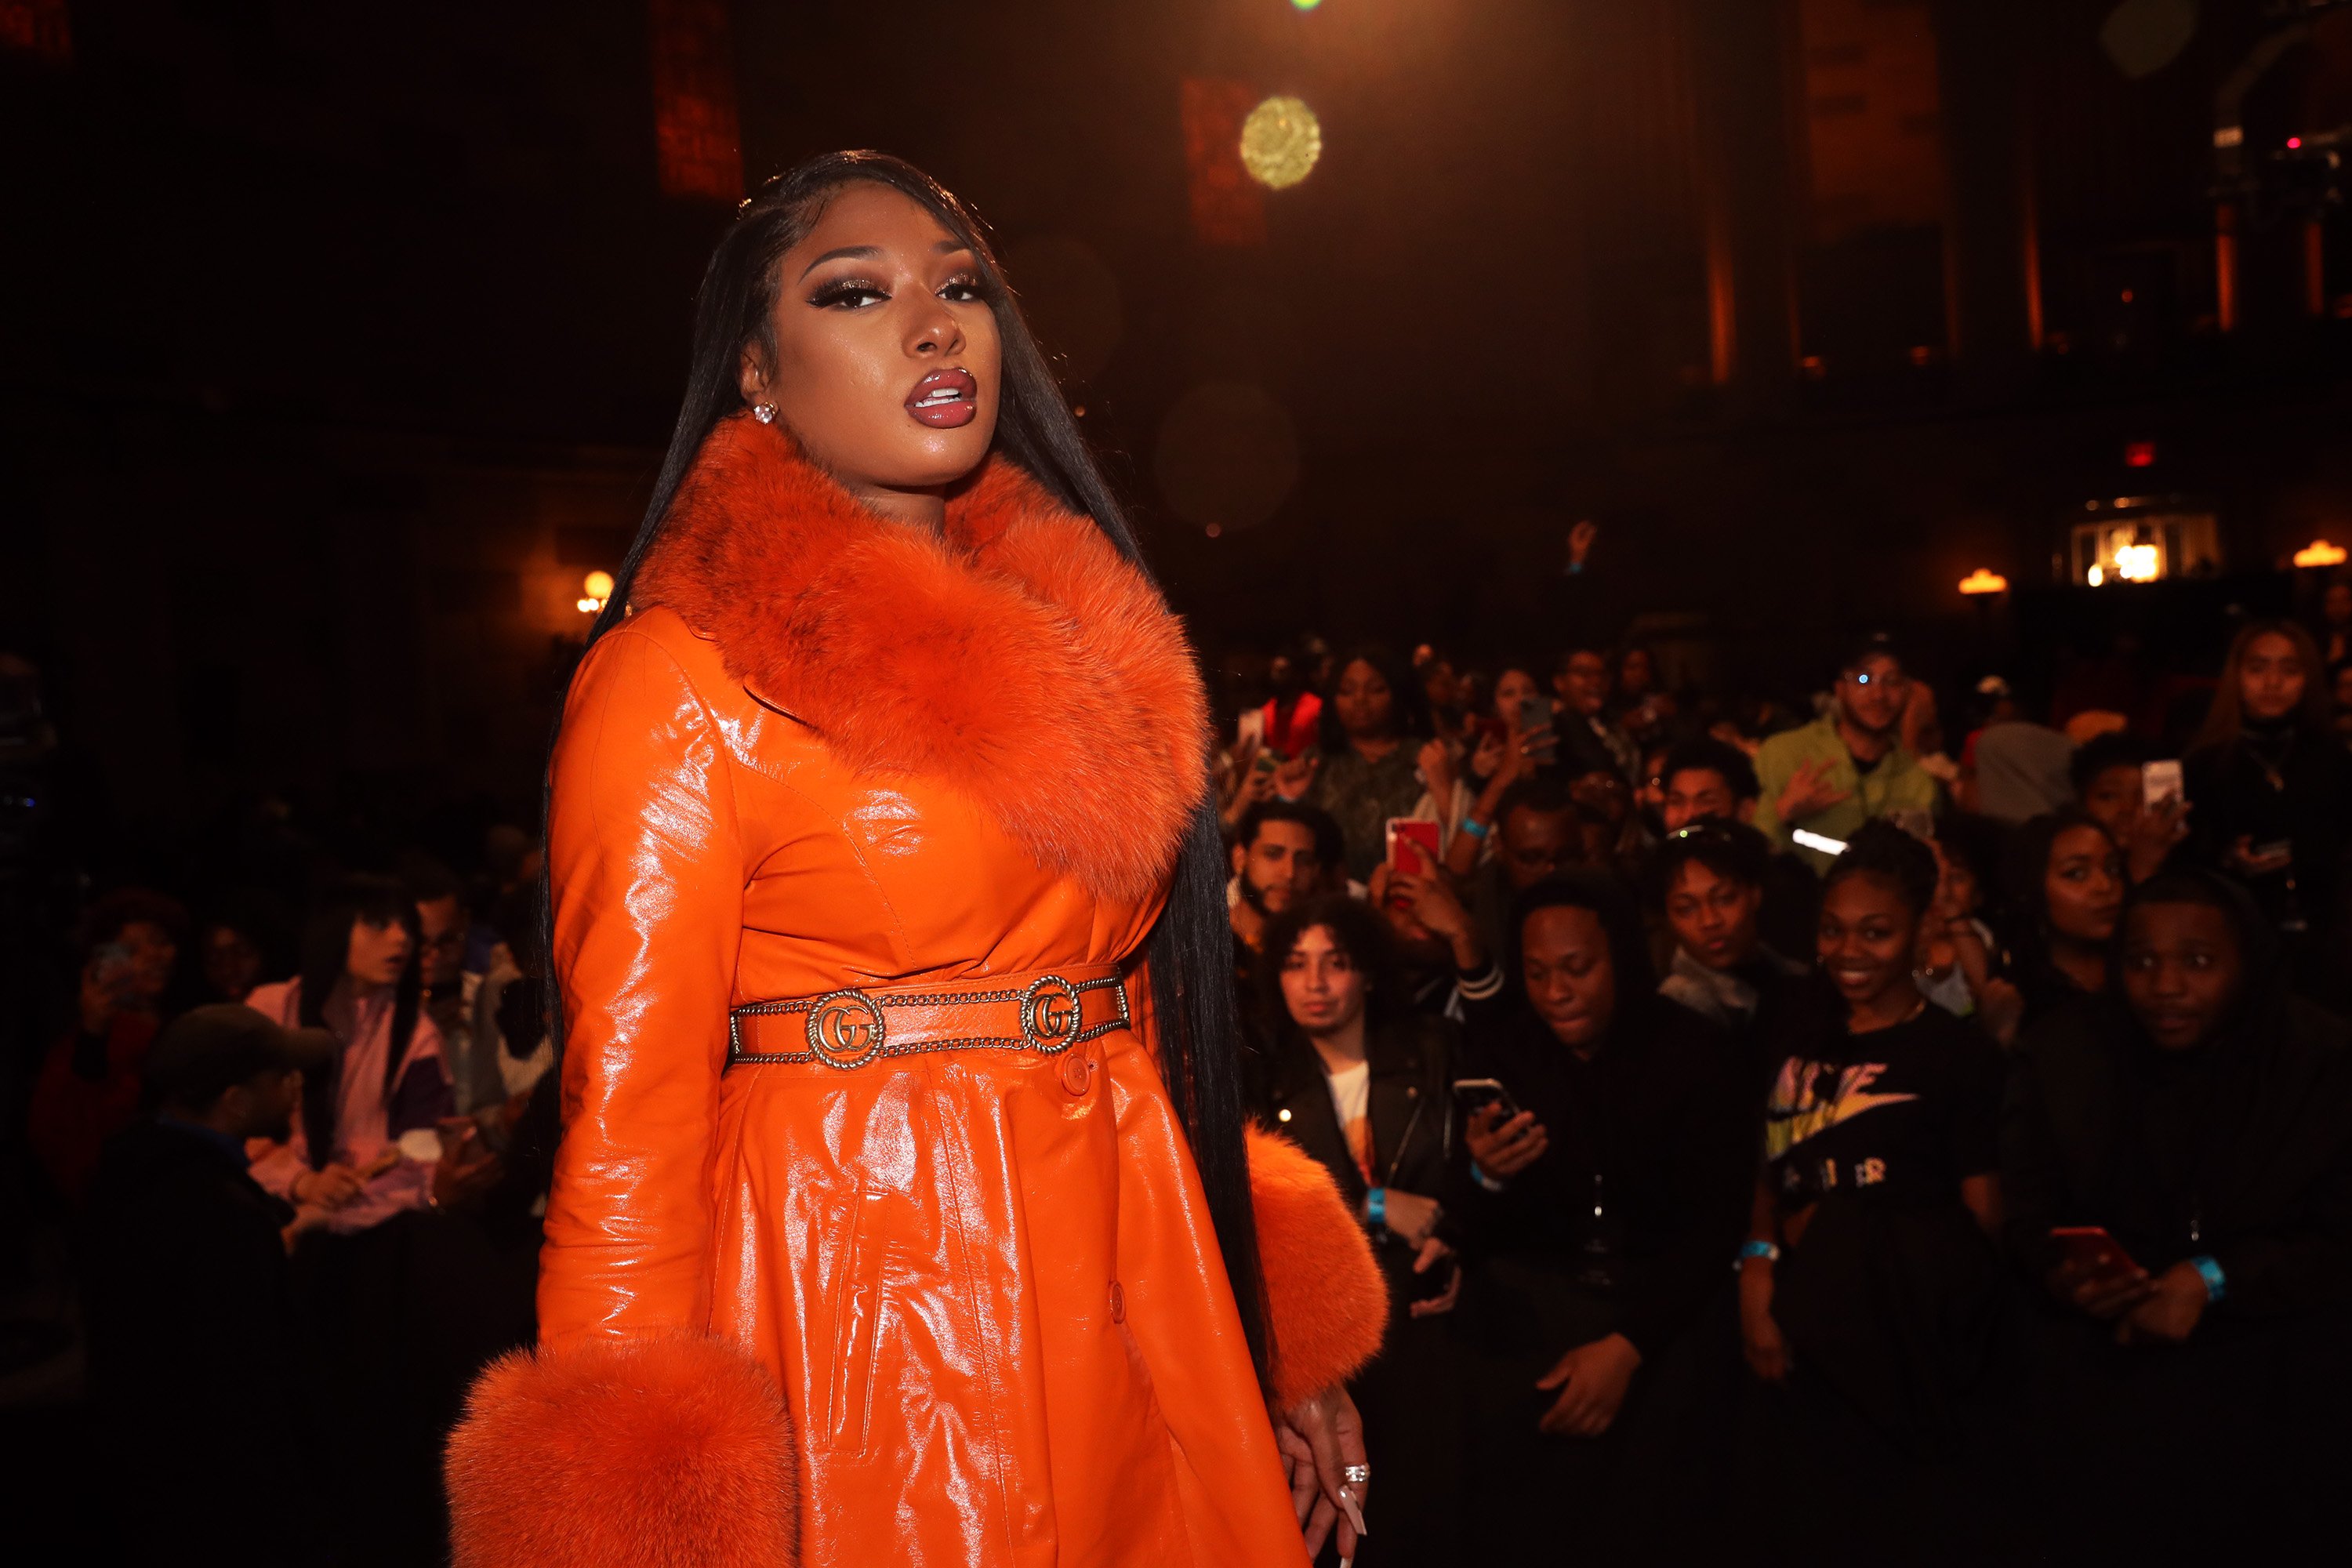 Recording artist Megan Thee Stallion appears onstage at #CRWN A Conversation With Elliott Wilson And Megan Thee Stallion at Gotham Hall on March 10, 2020 in New York City.